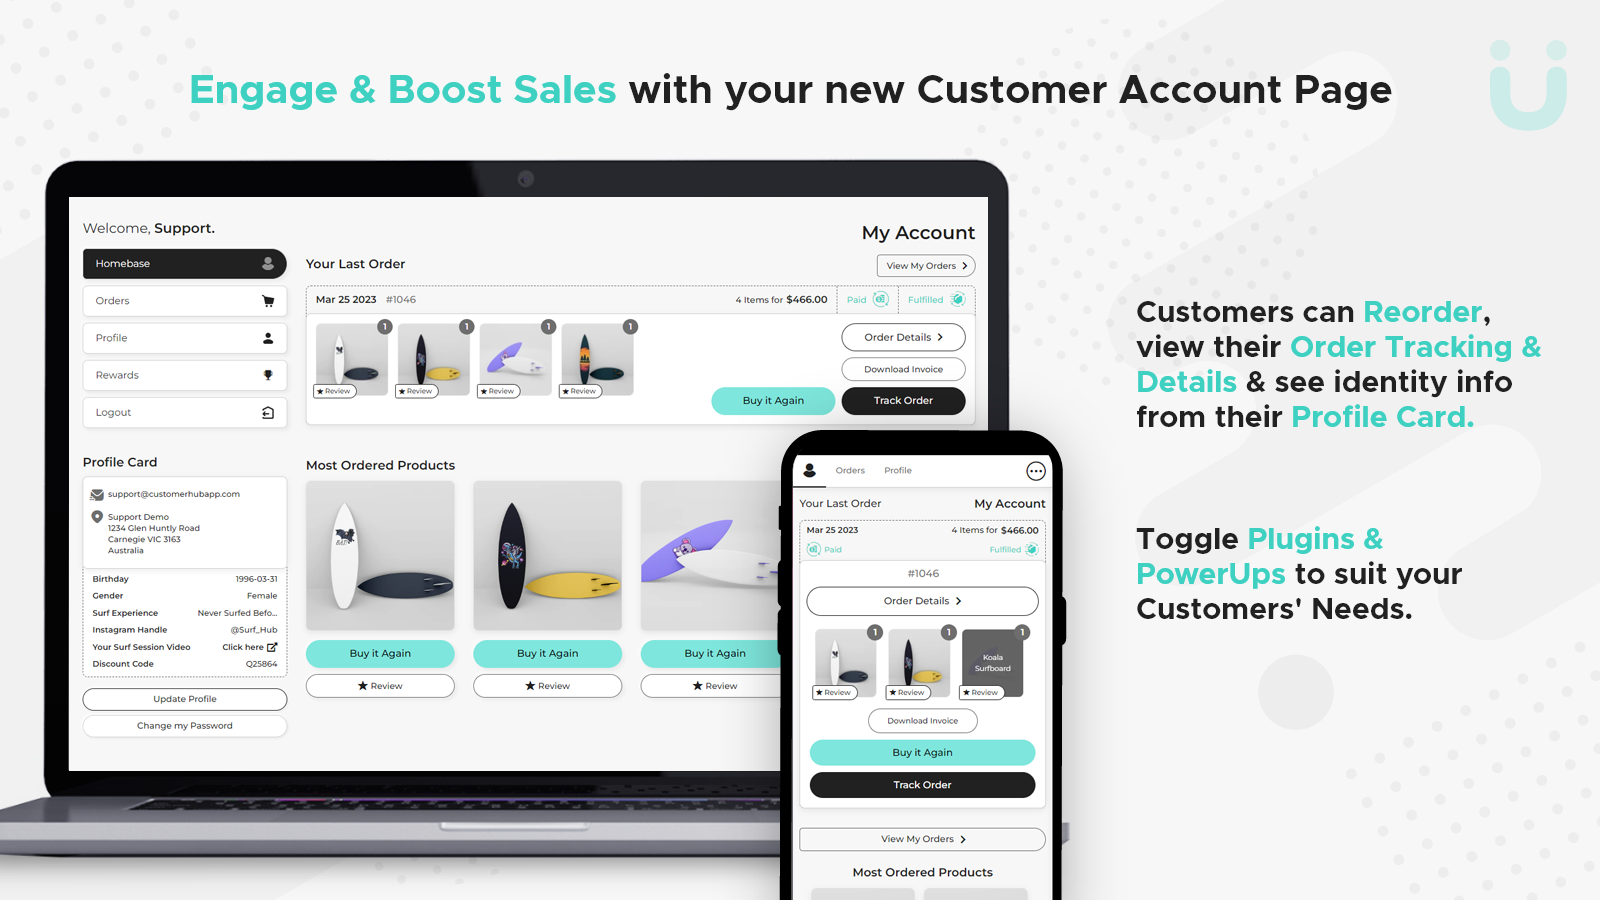 Engage & Boost Sales with your new Customer Account Page